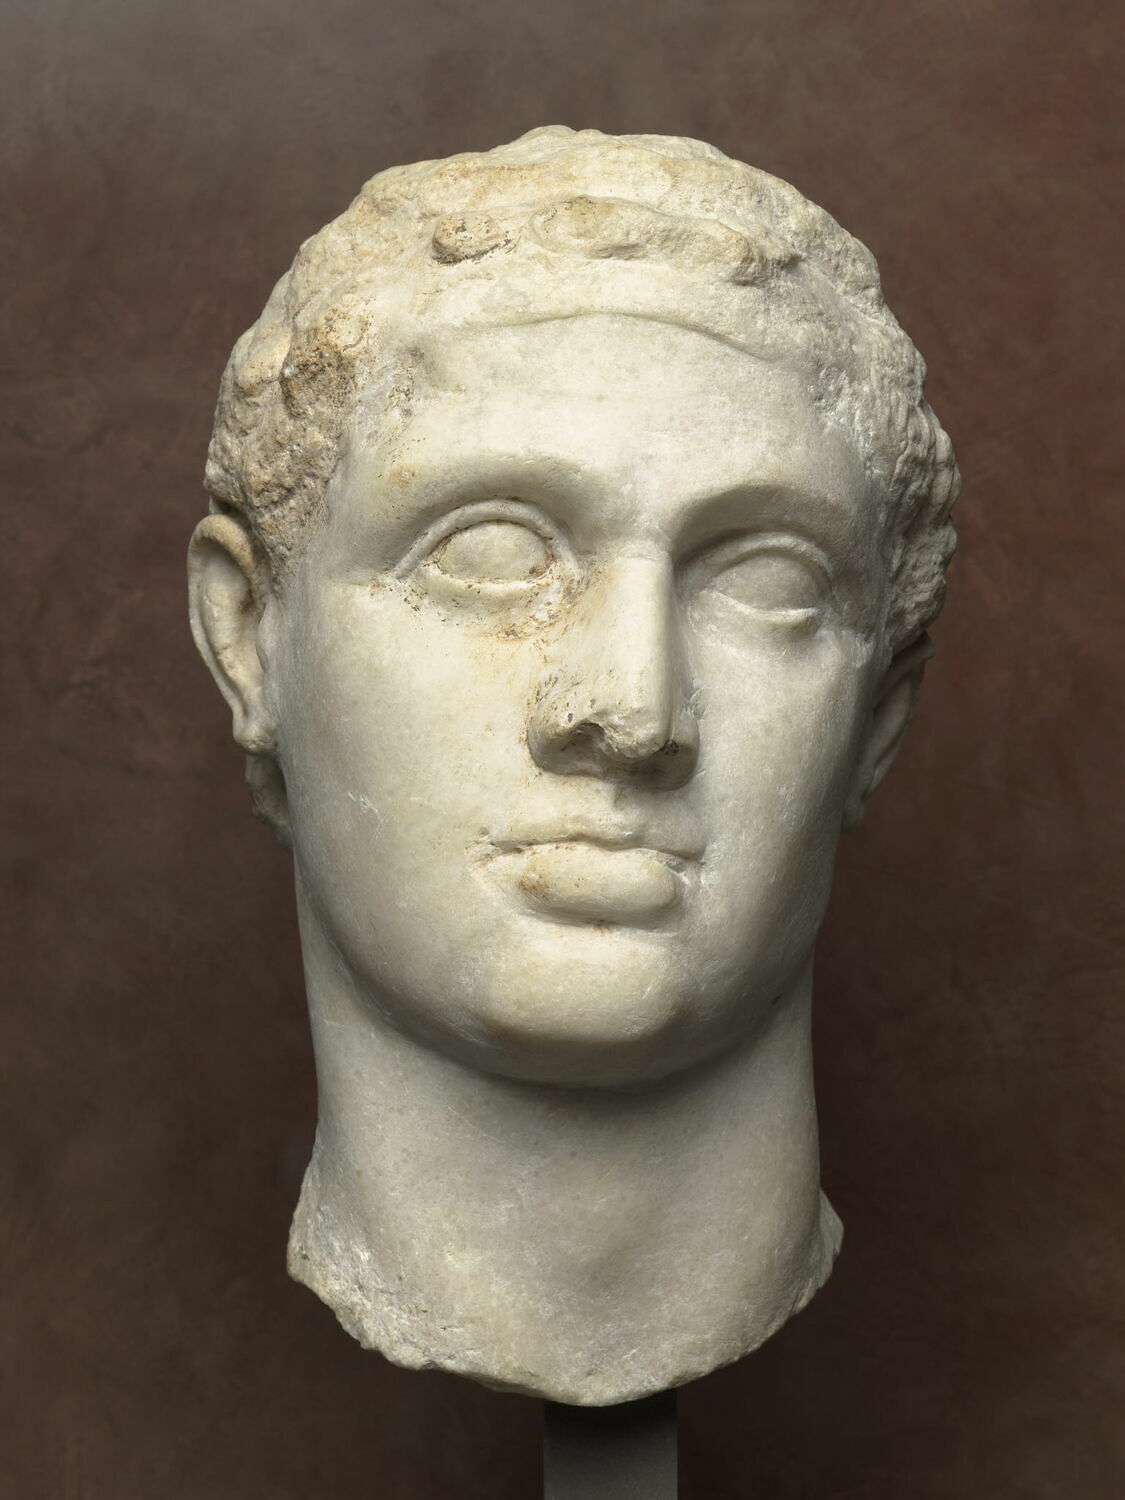 Ptolemaic dynastic portraits using a combination of marble and stucco:  Economy, Practicality, or Distinctive Style? - Roman Times